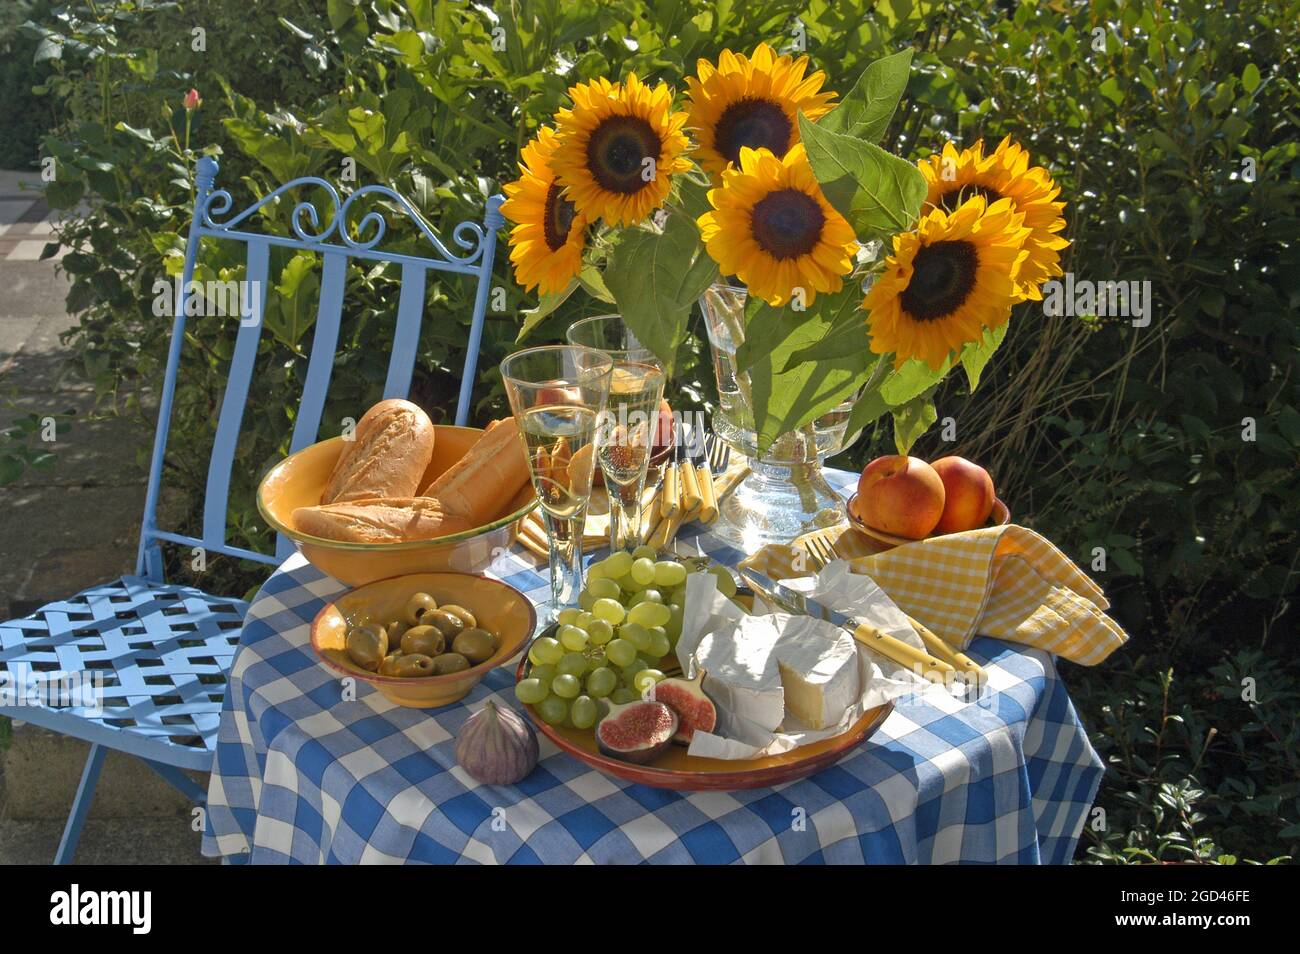 botany, sunflowers in a vase on a table with blue check tablecloth. Baguette, nectarines, ADDITIONAL-RIGHTS-CLEARANCE-INFO-NOT-AVAILABLE Stock Photo